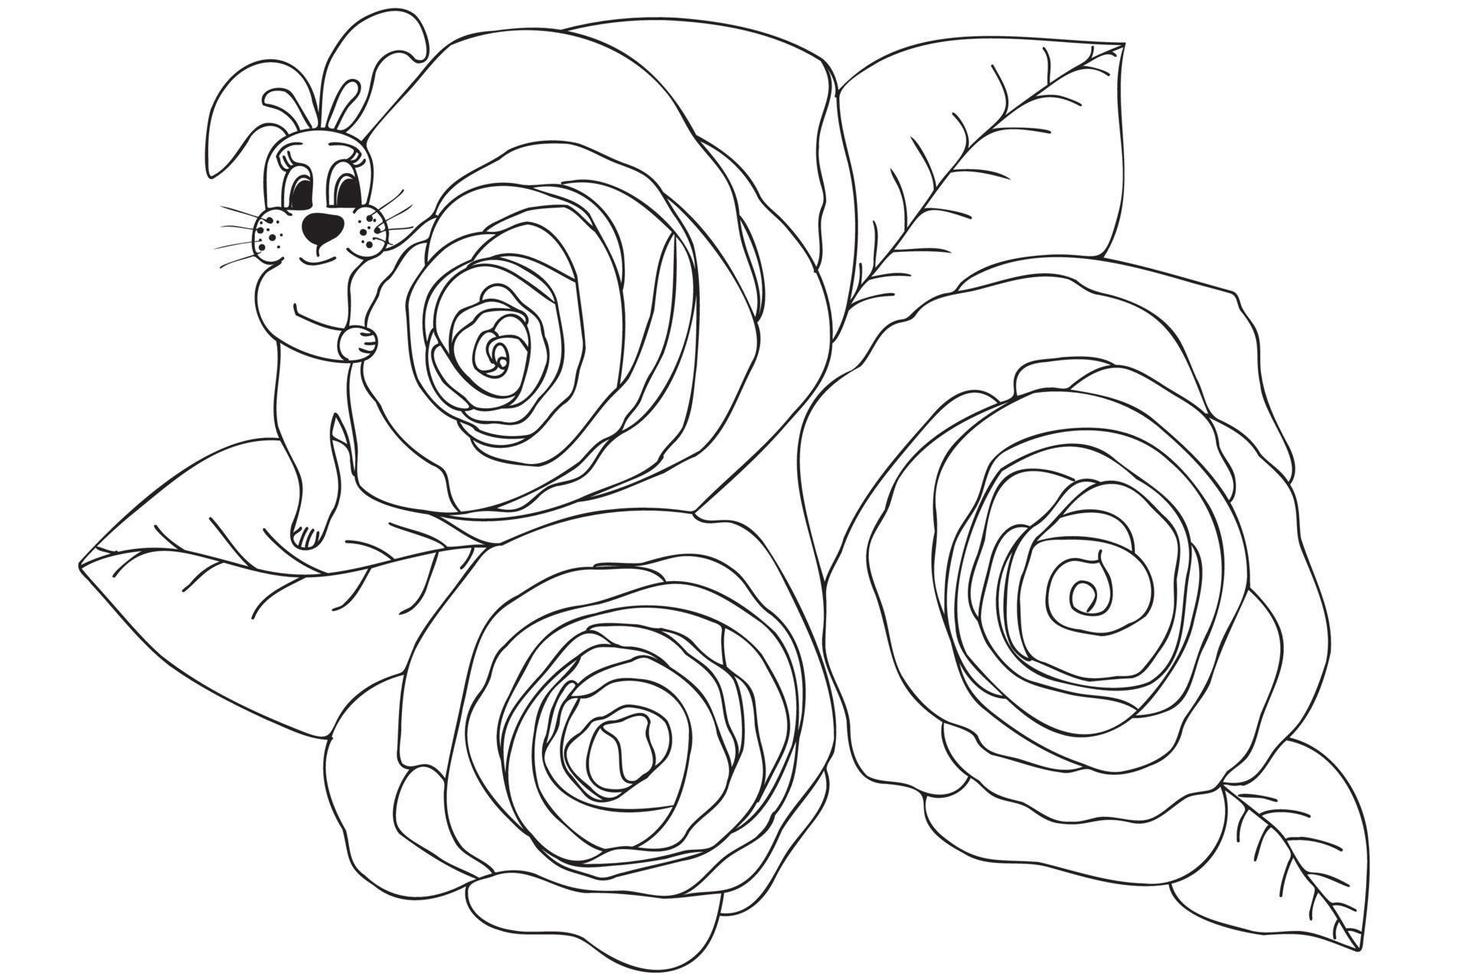 Bunny with roses outline vector, line art illustration with black thin contour isolated on white background. Bunny standing on bouquet of roses. vector